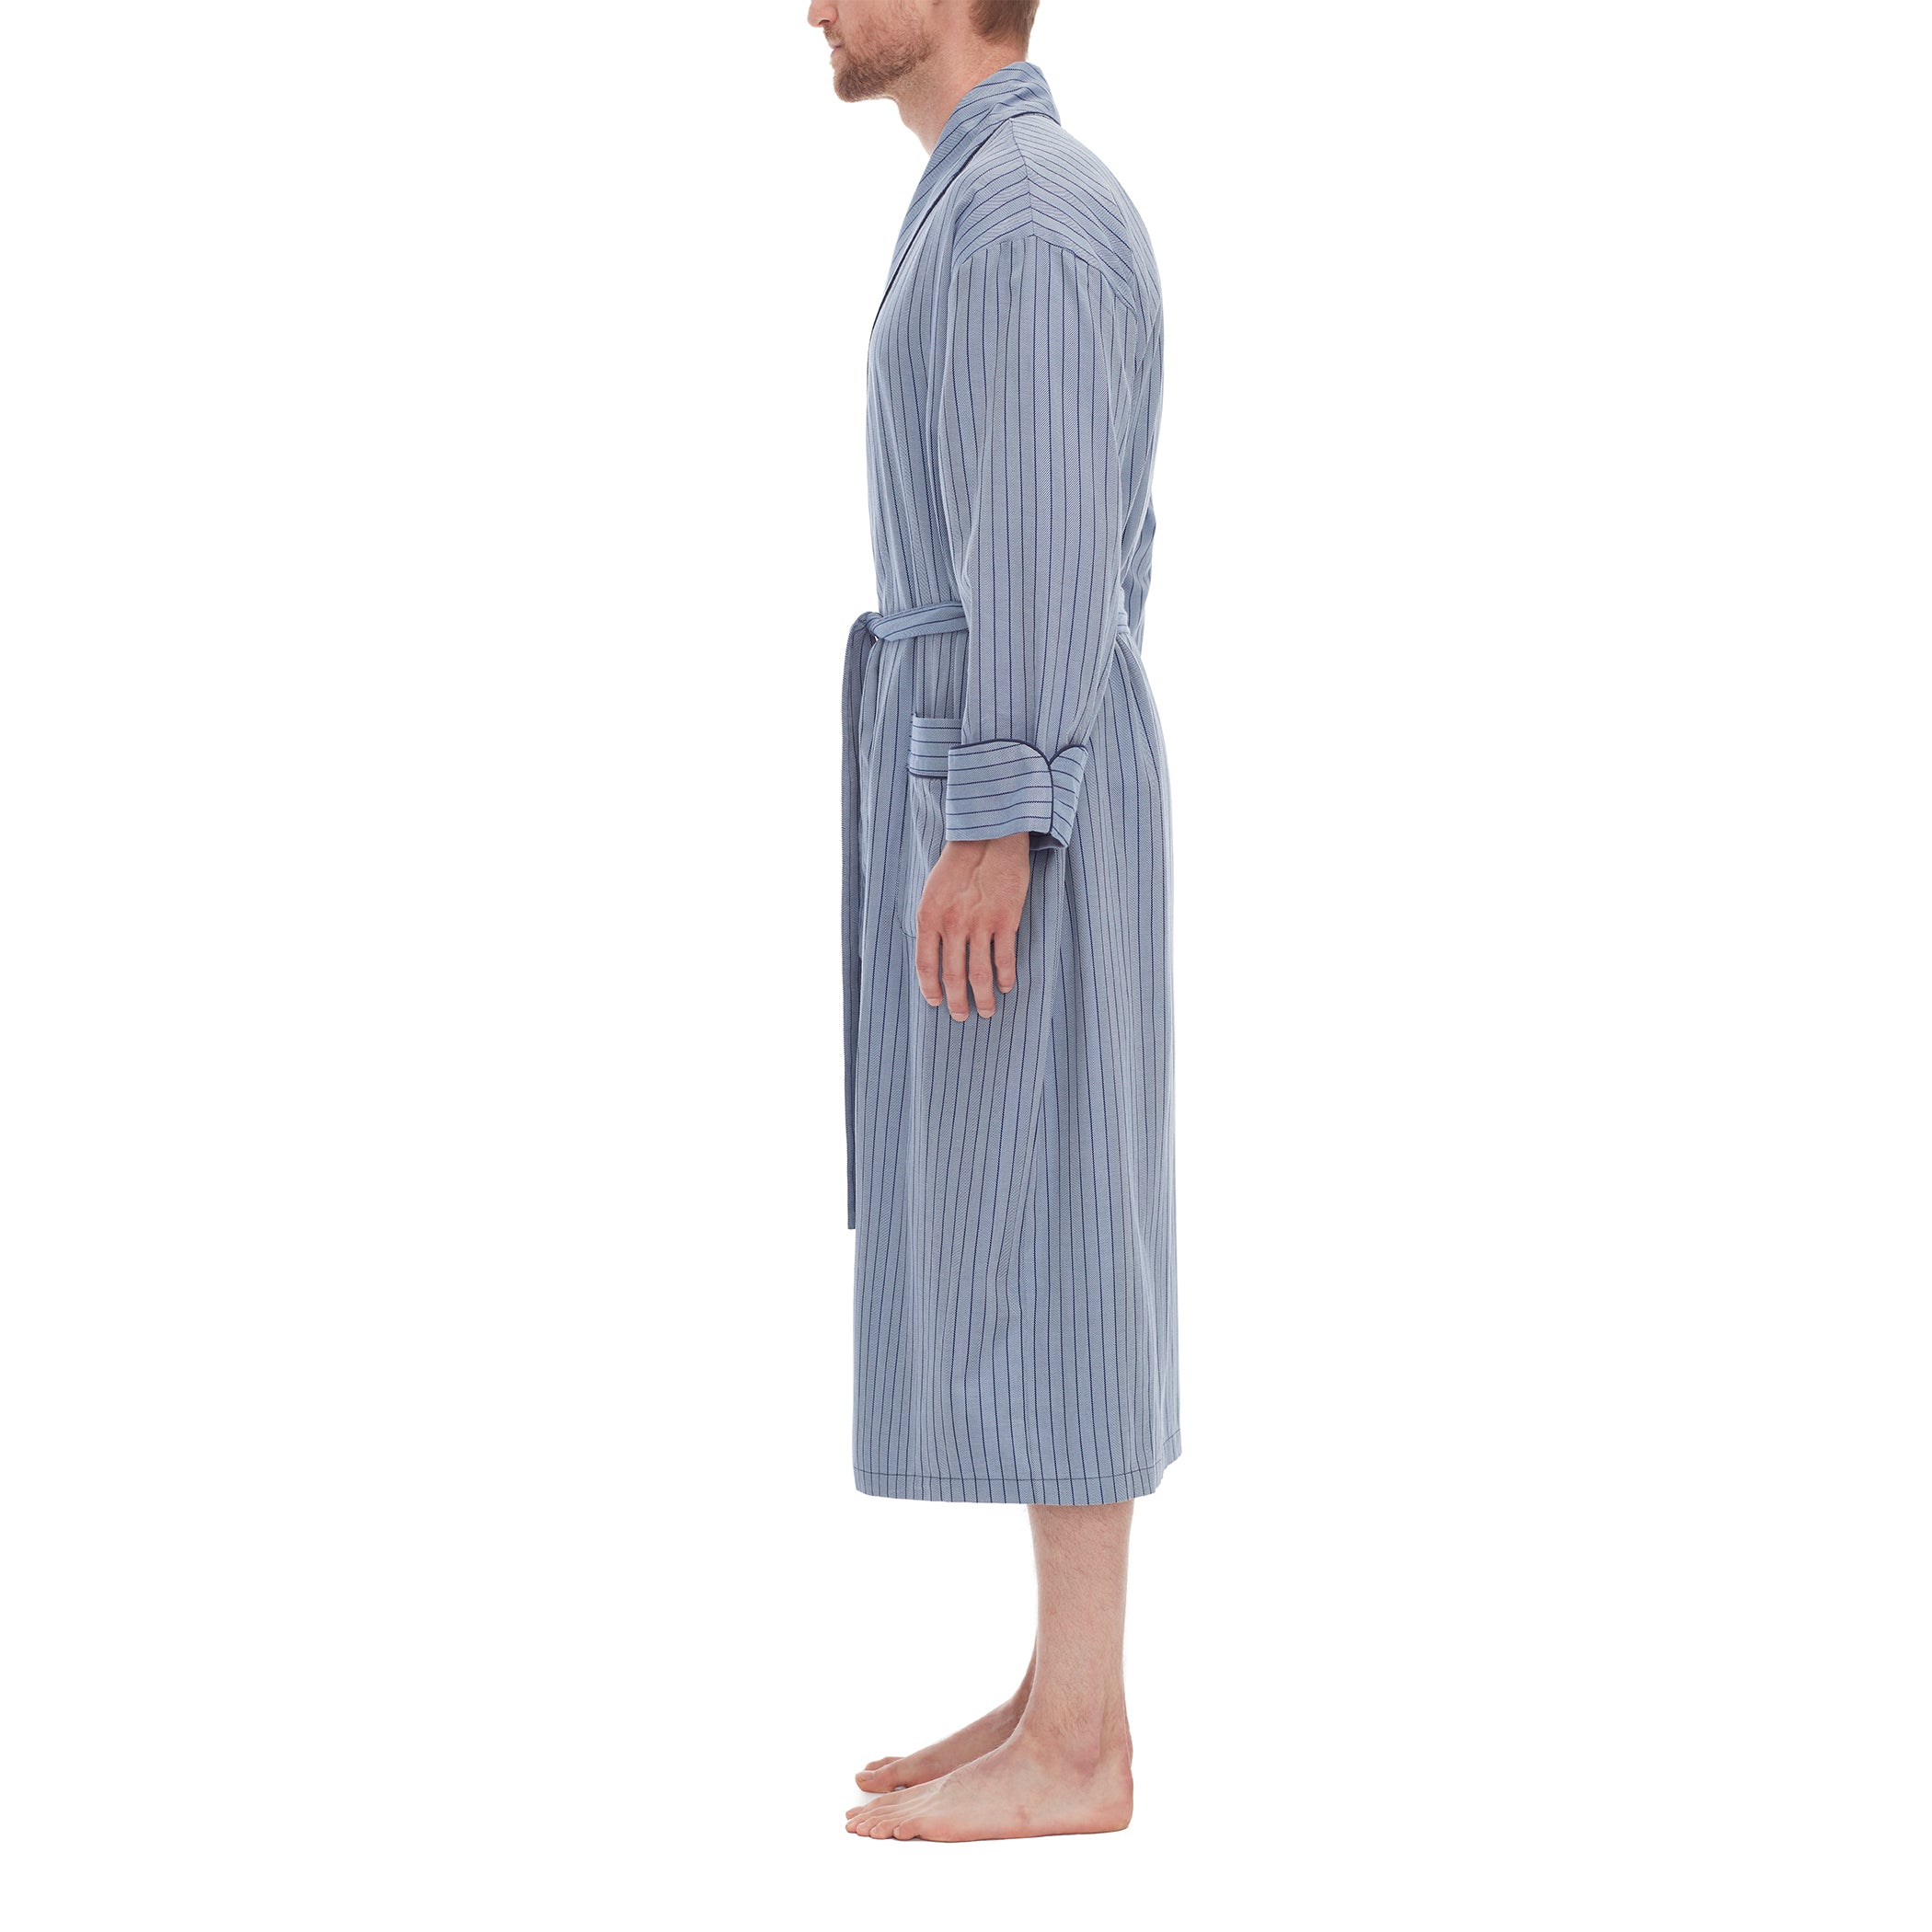 Blue Lines Woven Shawl Robe 50 Inch